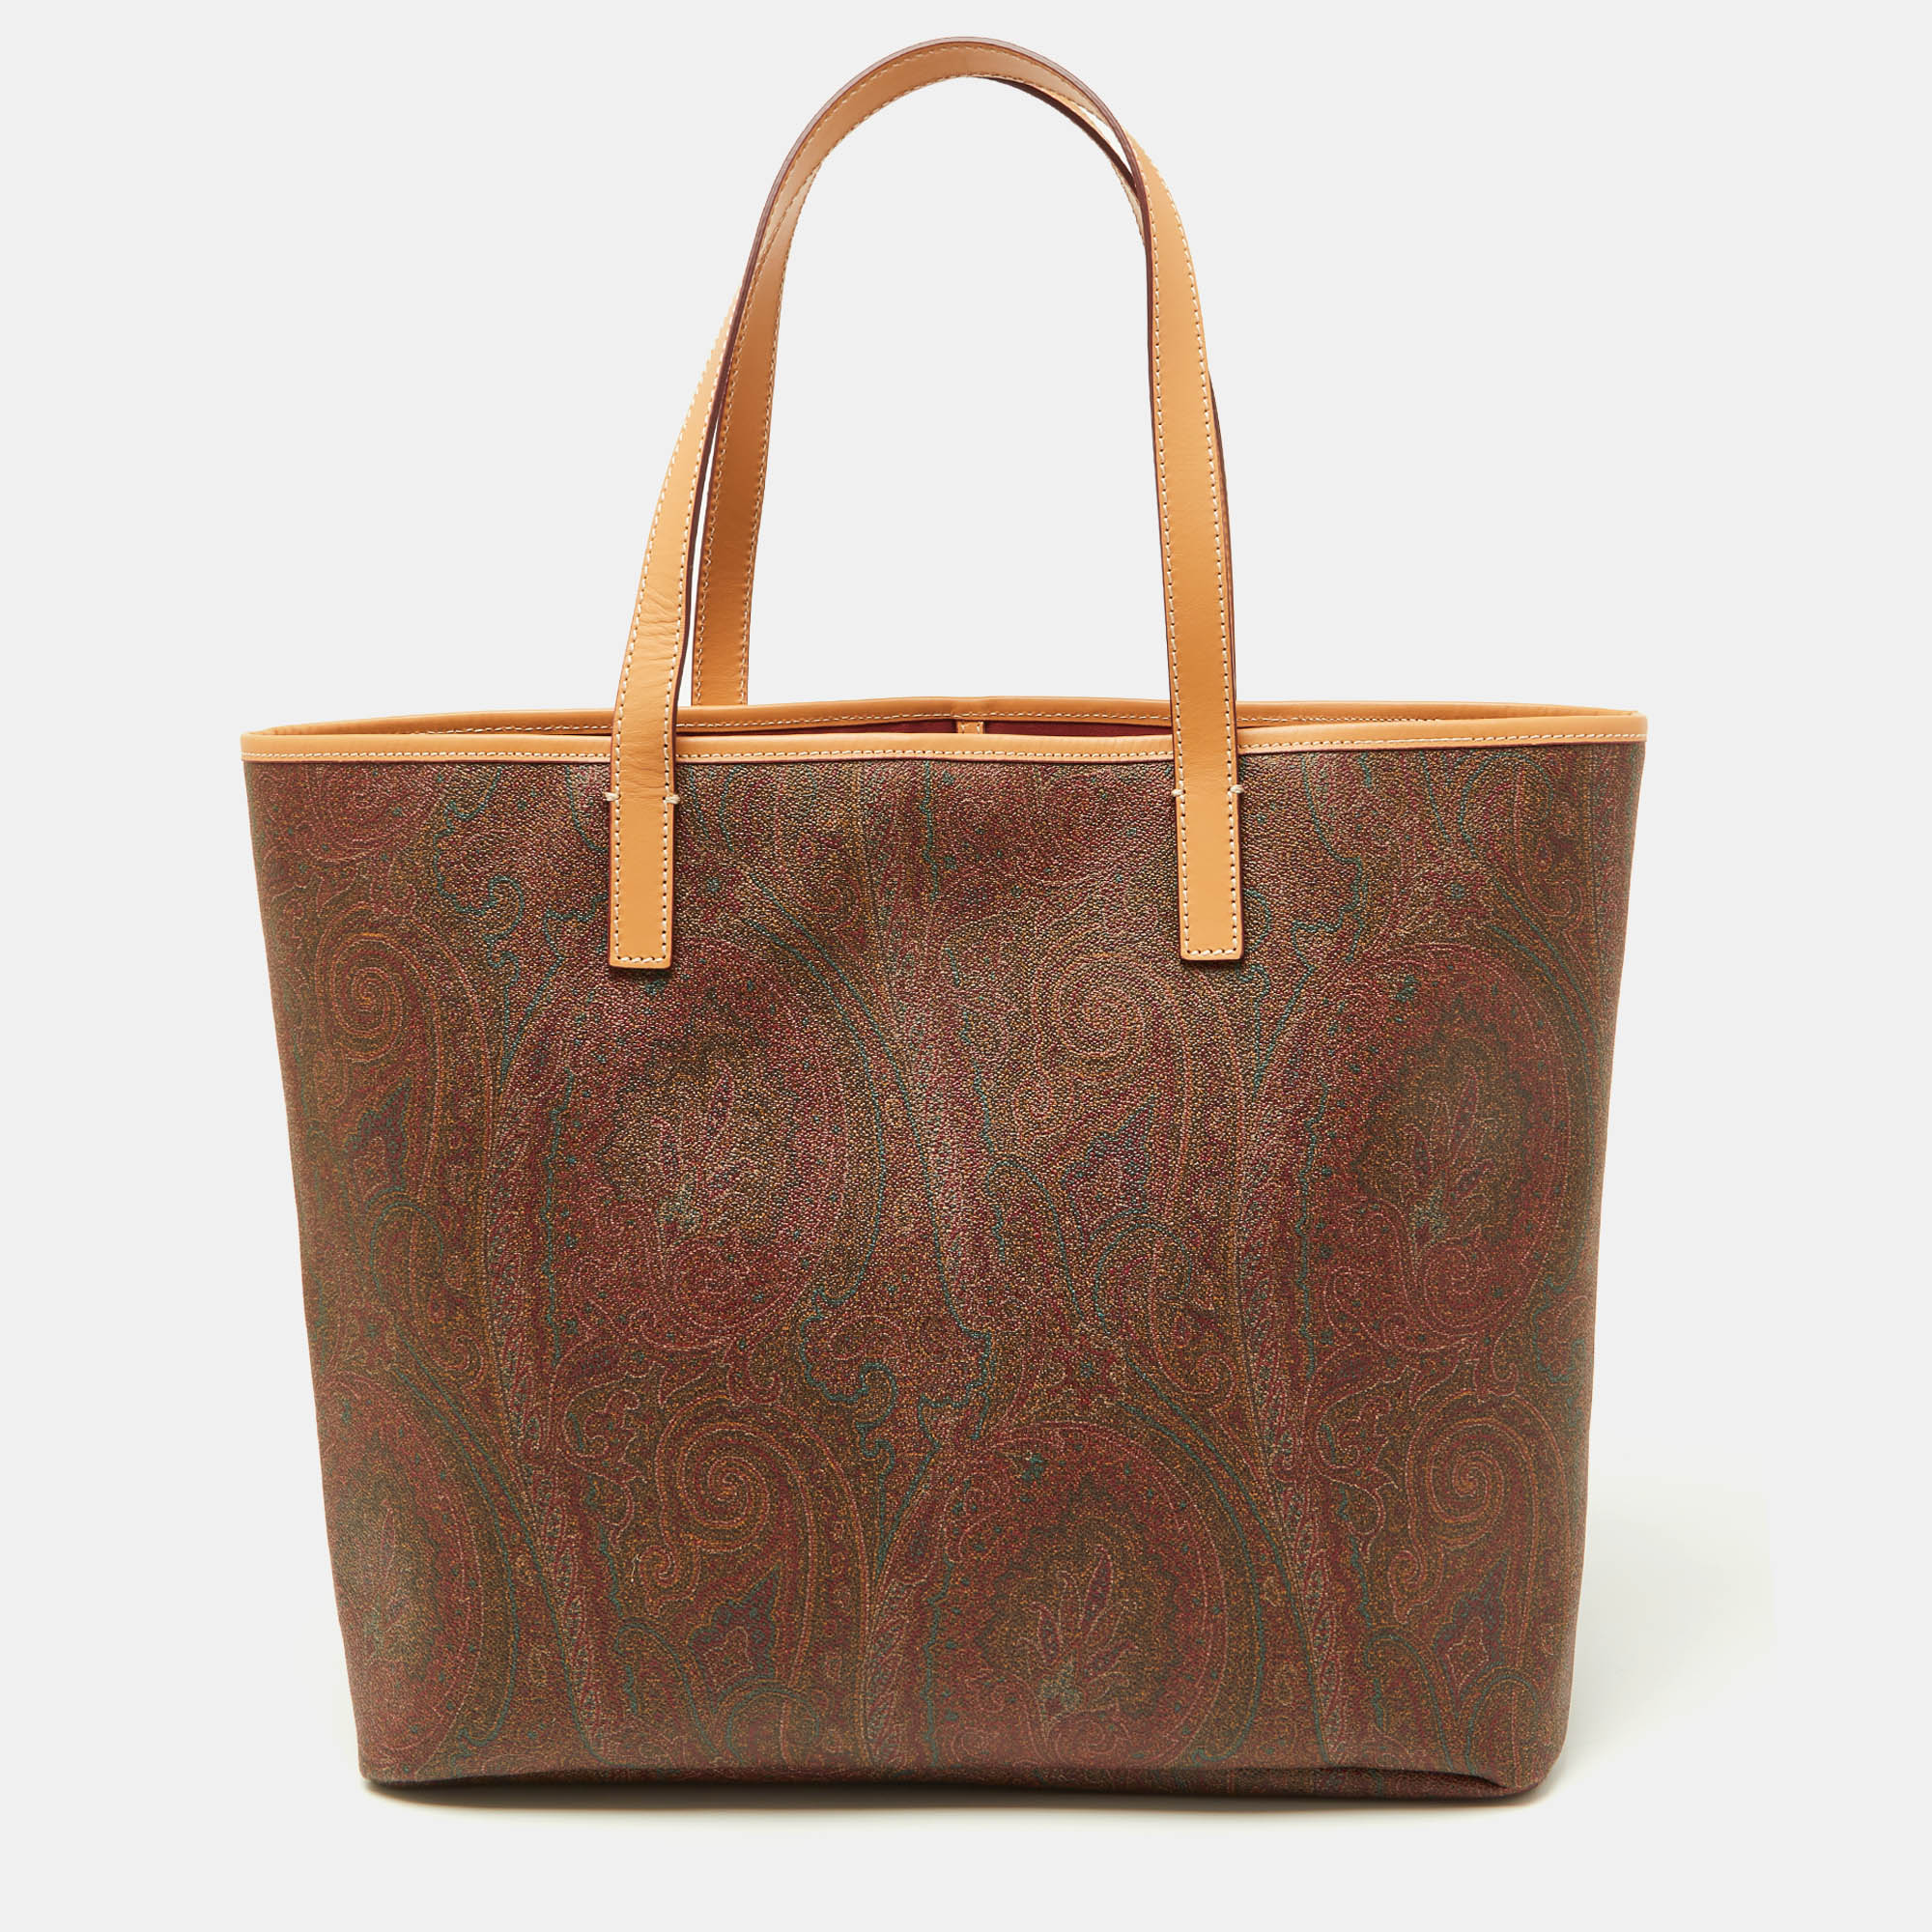 Etro is famous for prints exceptional quality and their designs. This paisley printed tote is crafted from coated canvas and leather and comes with a fabric lined interior that will hold all your daily necessities. The bag is complete with dual handles and a brown hue all over.